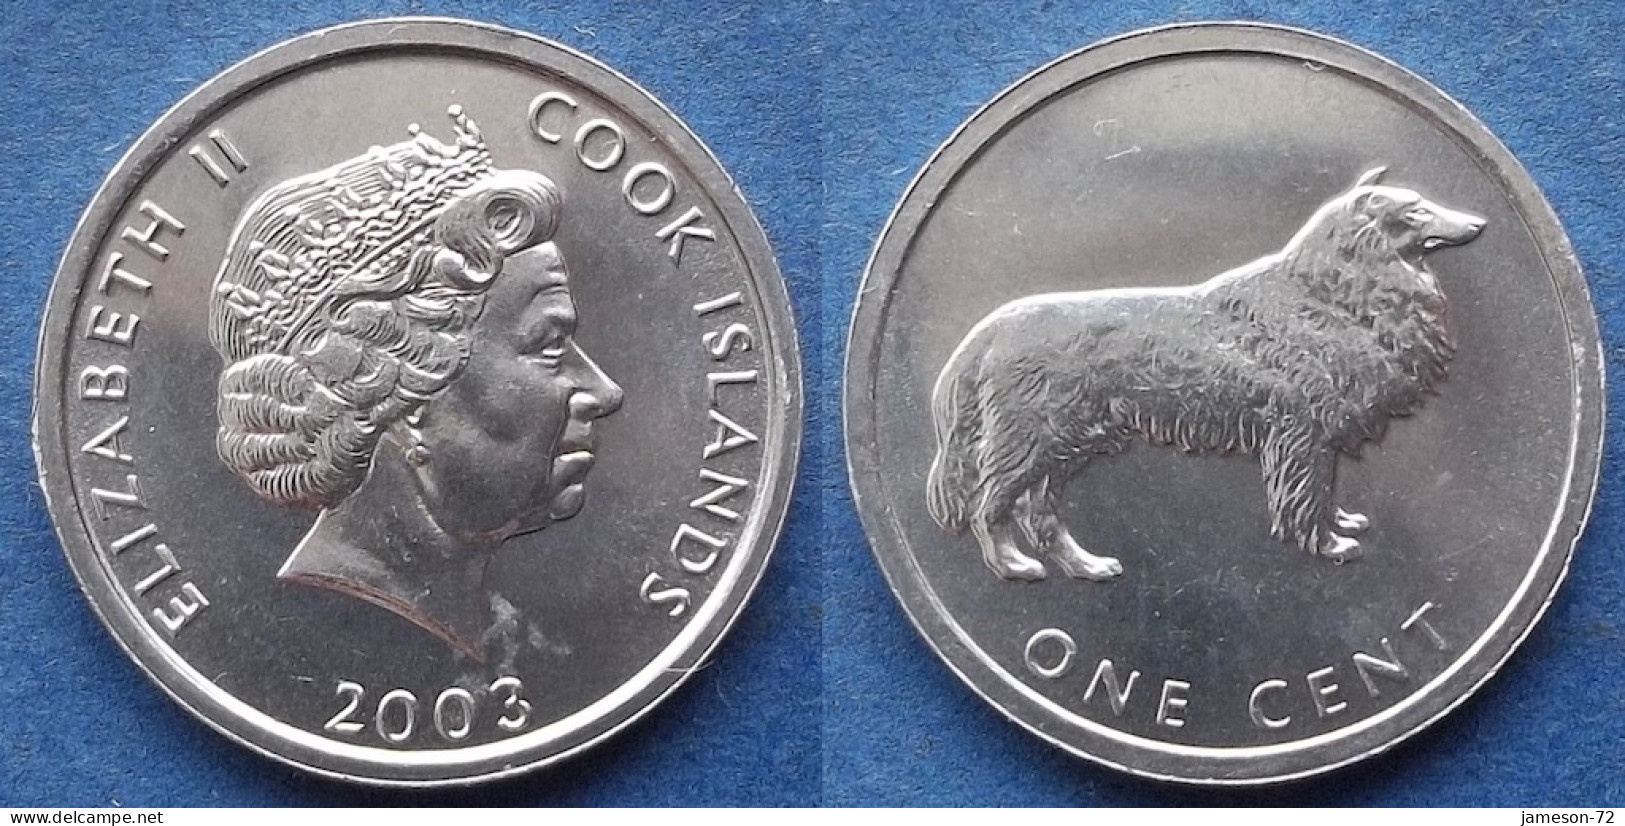 COOK ISLANDS - 1 Cent 2003 "Collie Dog" KM# 420 Dependency Of New Zealand Elizabeth II - Edelweiss Coins - Cook